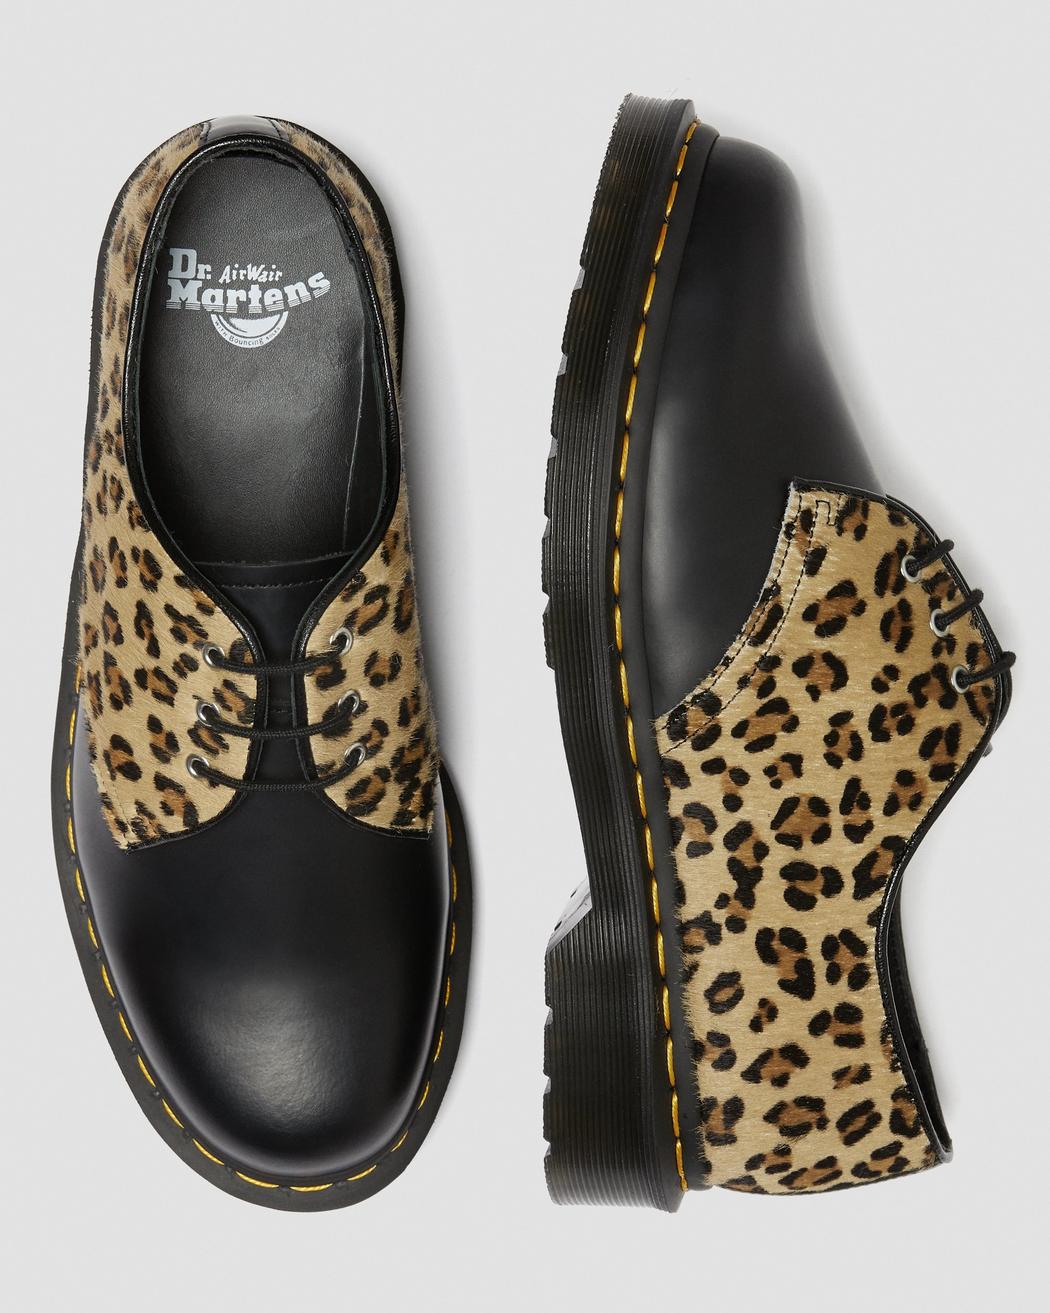 1461 LEOPARD AND BLACK OXFORD DR MARTENS – Posers Hollywood